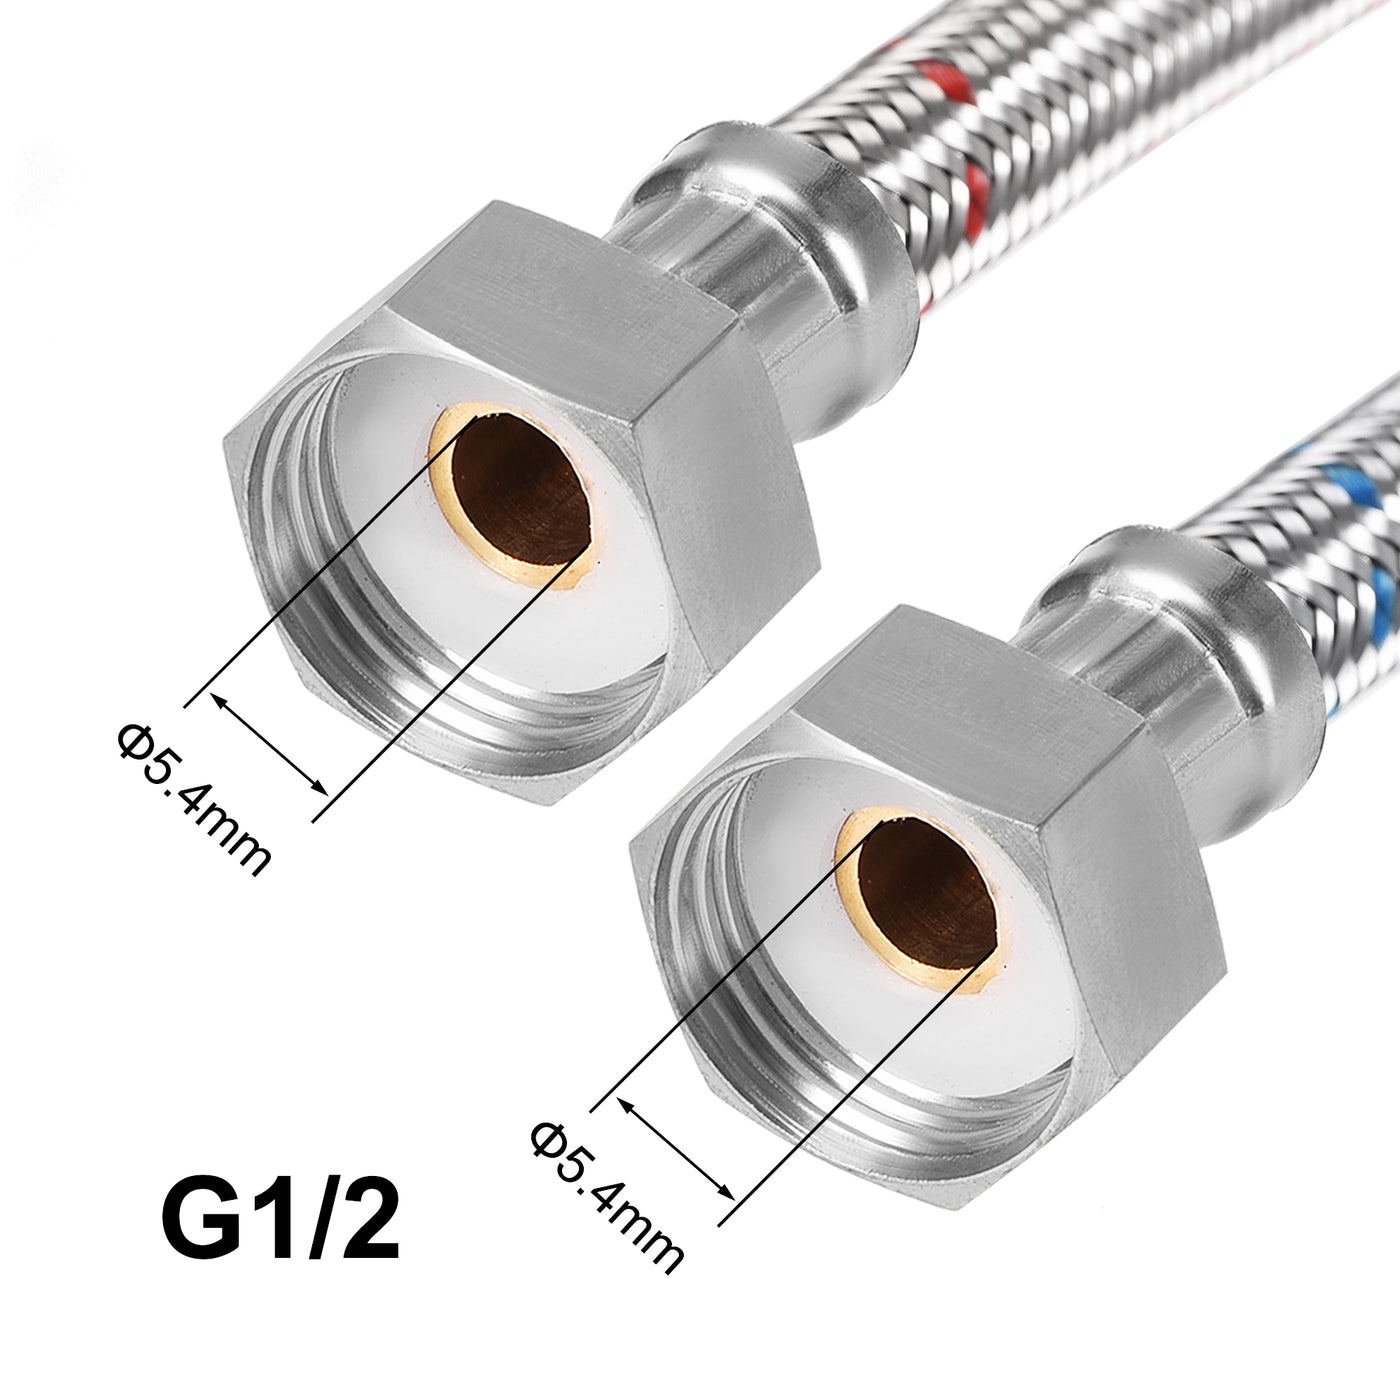 uxcell Uxcell Faucet Supply Hose Connector G1/2 Female x M10x1.0 Male 31 Inch Length 304 Stainless Steel Hose 1set